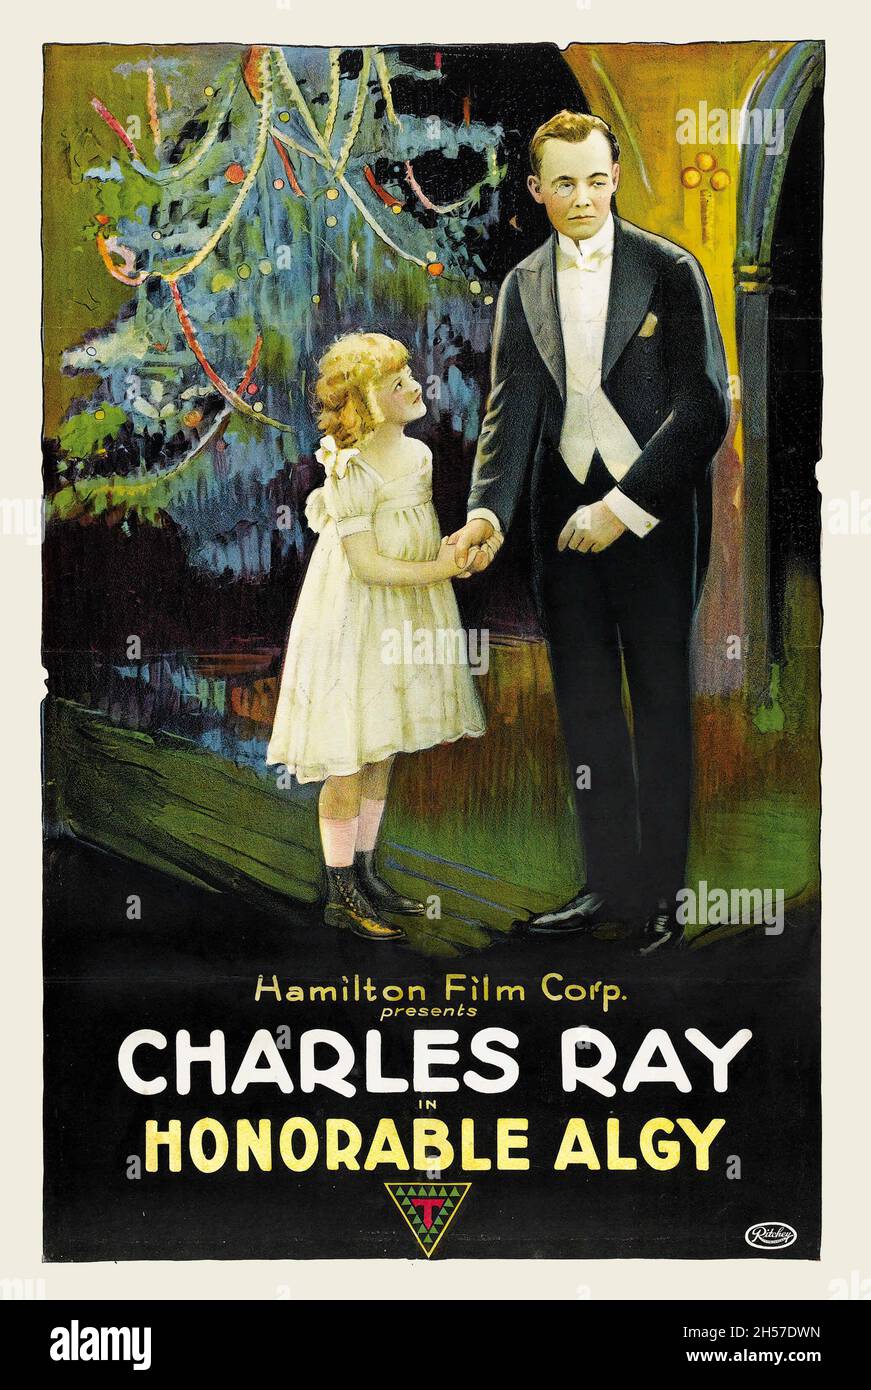 Vintage movie poster for the 1916 American silent comedy-drama film The Honorable Algy feat. Charles Ray. Hamilton Film Corp. Stock Photo